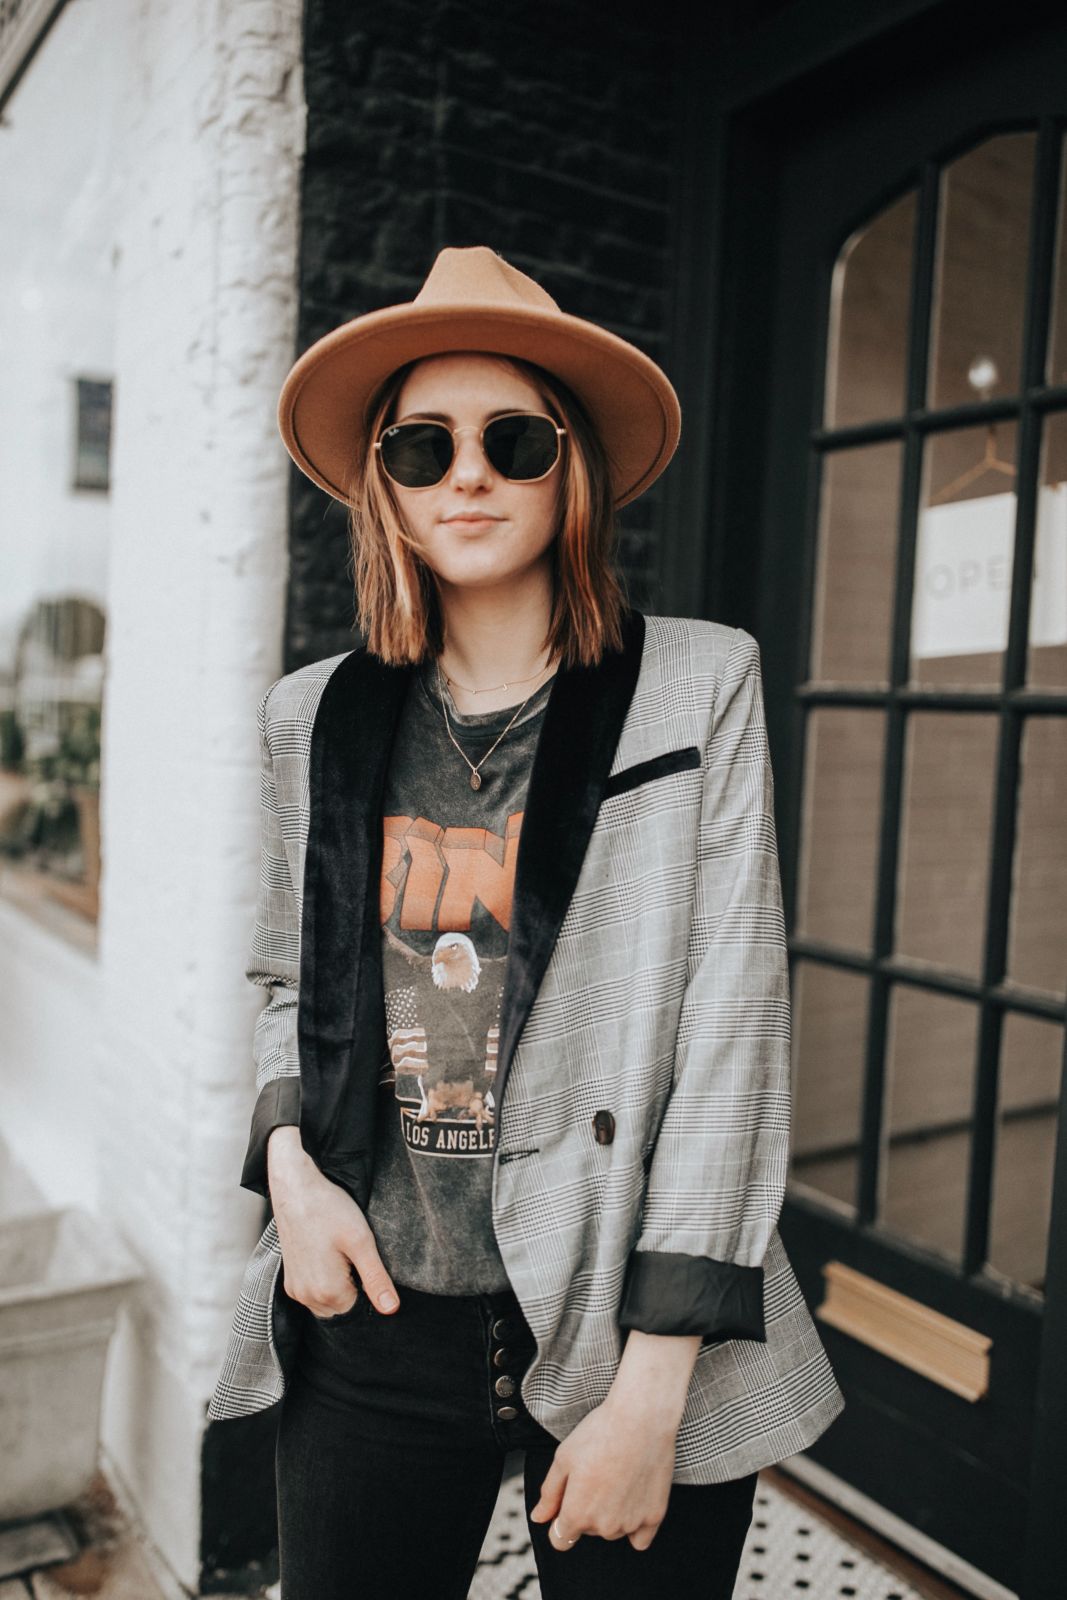 spring style | anine bing | graphic tee | casual outfit | blazer style | black skinny jeans | personal blog post | oh darling blog